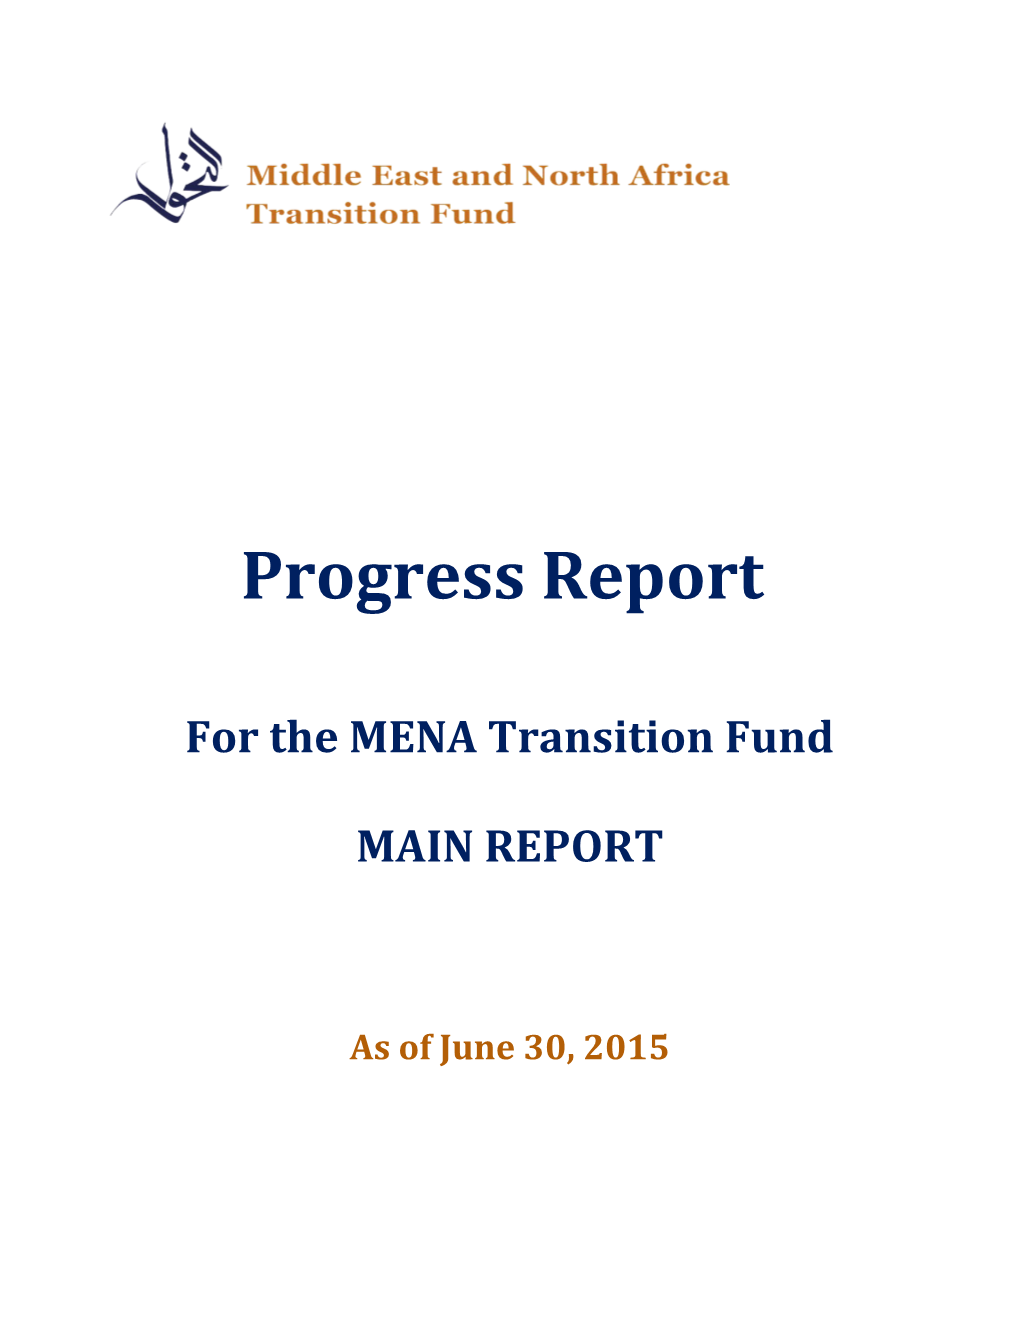 For the MENA Transition Fund